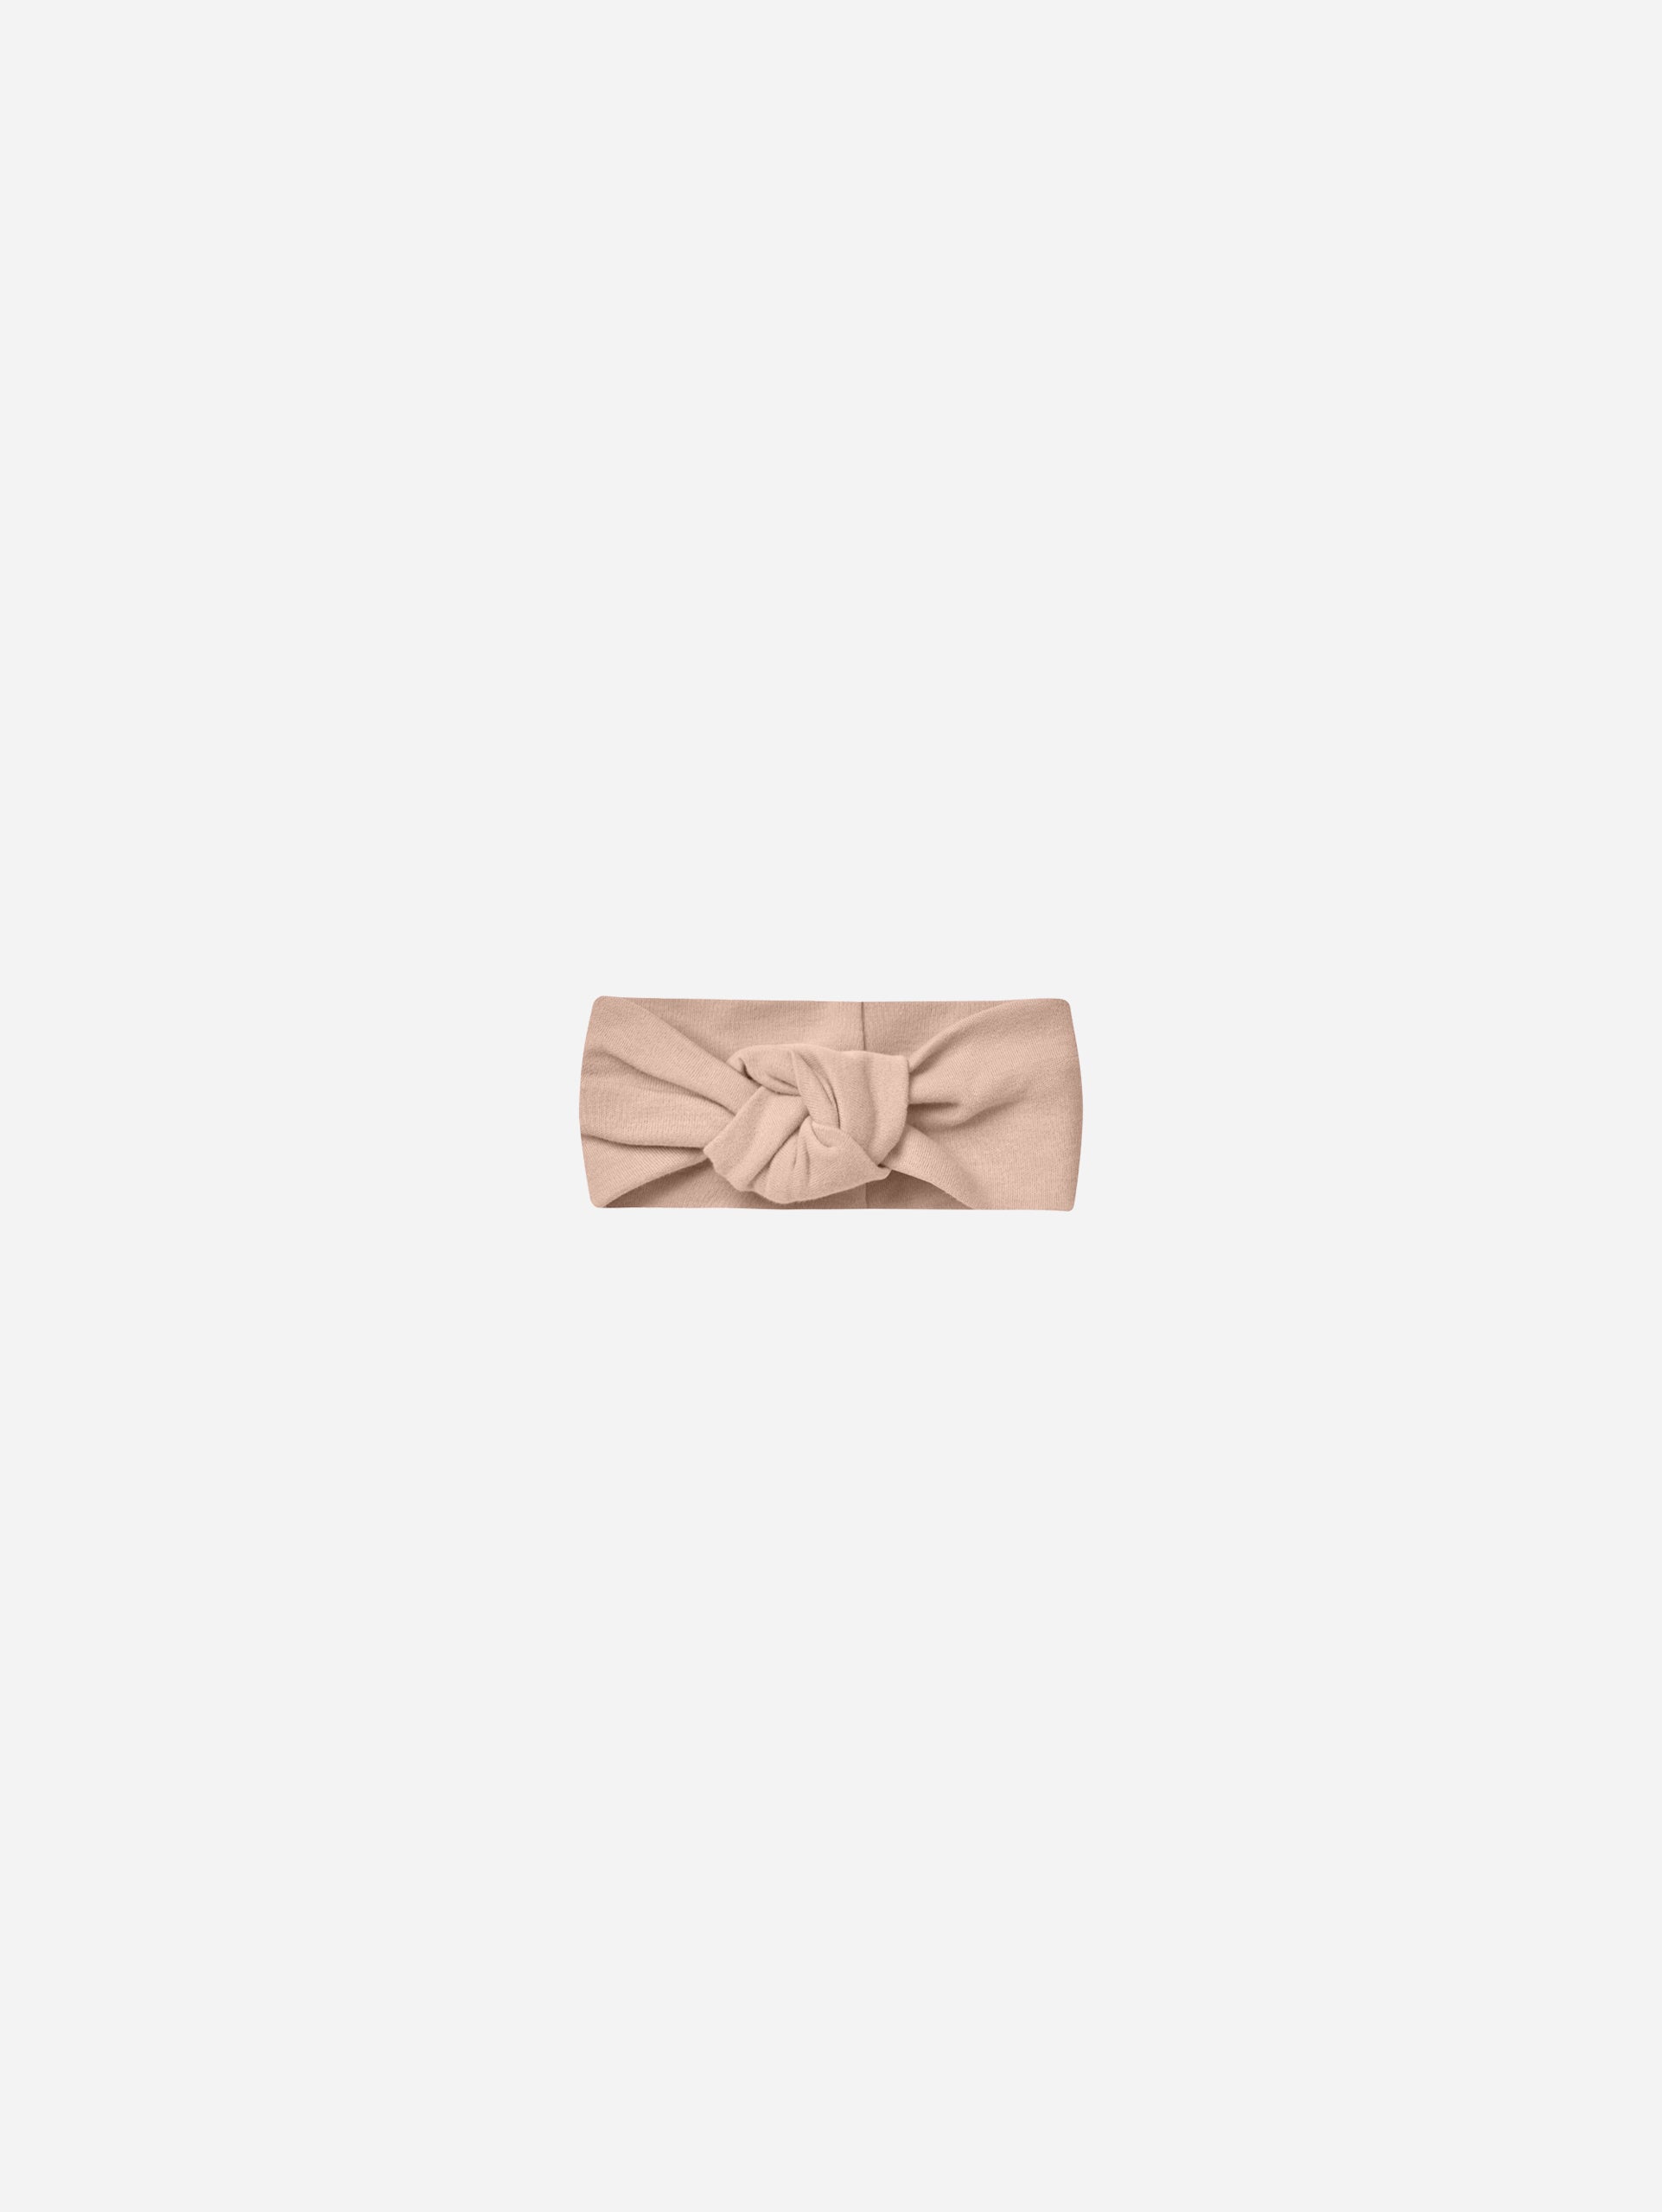 Knotted Headband || Blush - Rylee + Cru | Kids Clothes | Trendy Baby Clothes | Modern Infant Outfits |